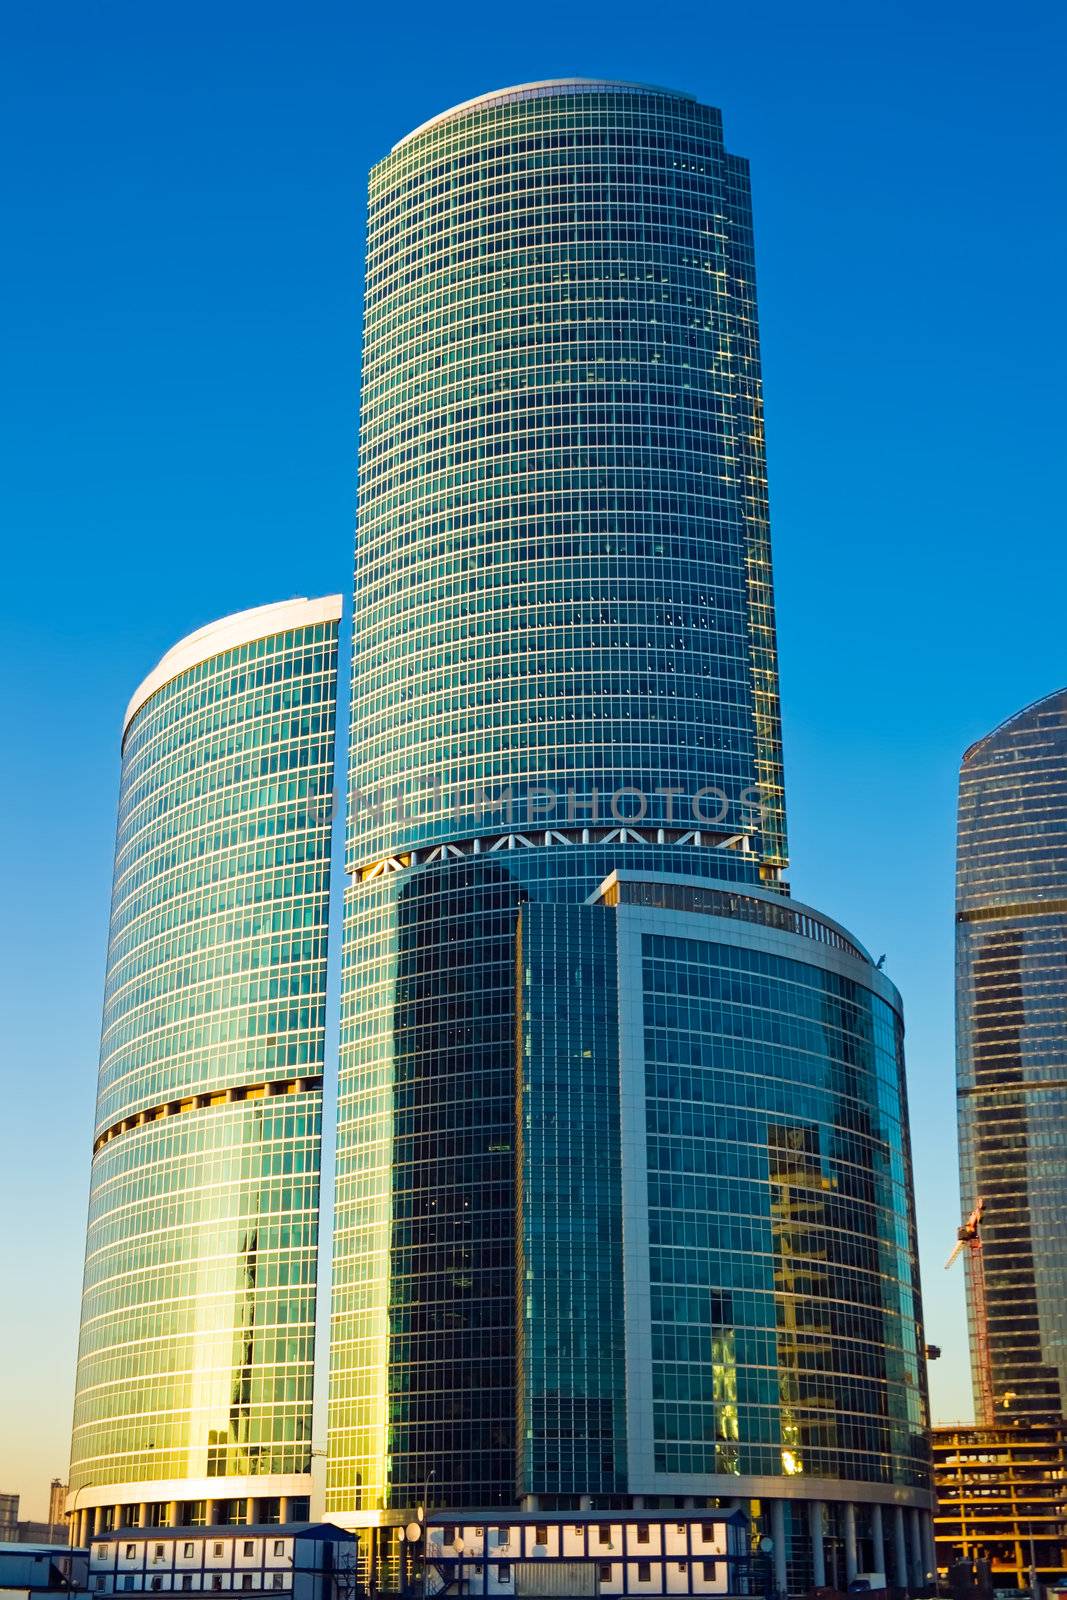 Skyscrapers of the International Business Centre at sunset, Moscow, Russia